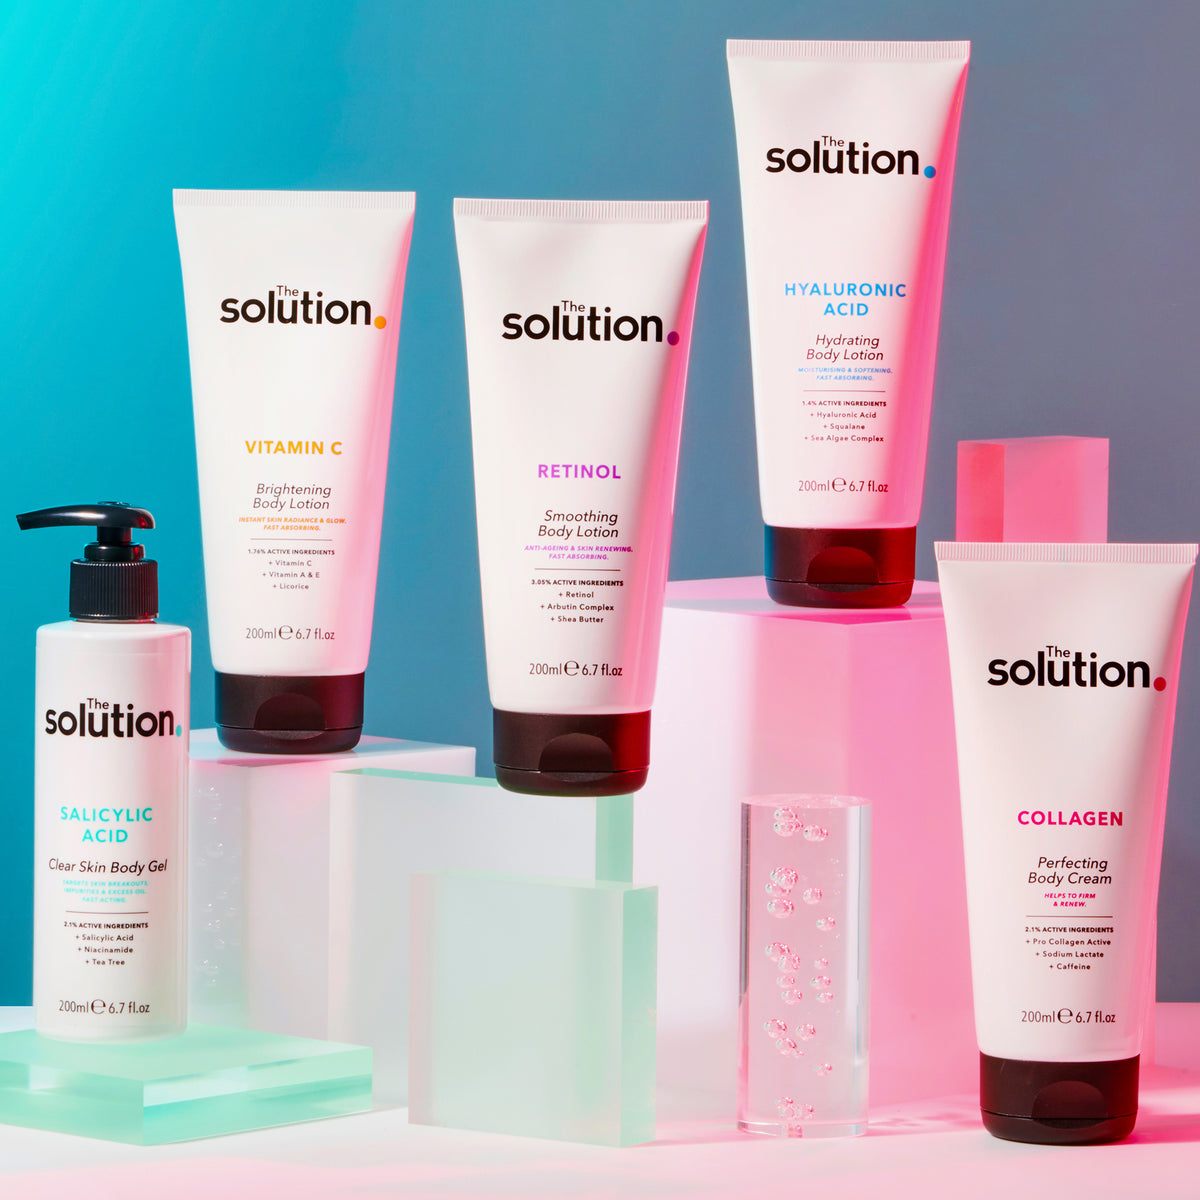 The Solution | Hyaluronic Acid Hydrating Body Lotion